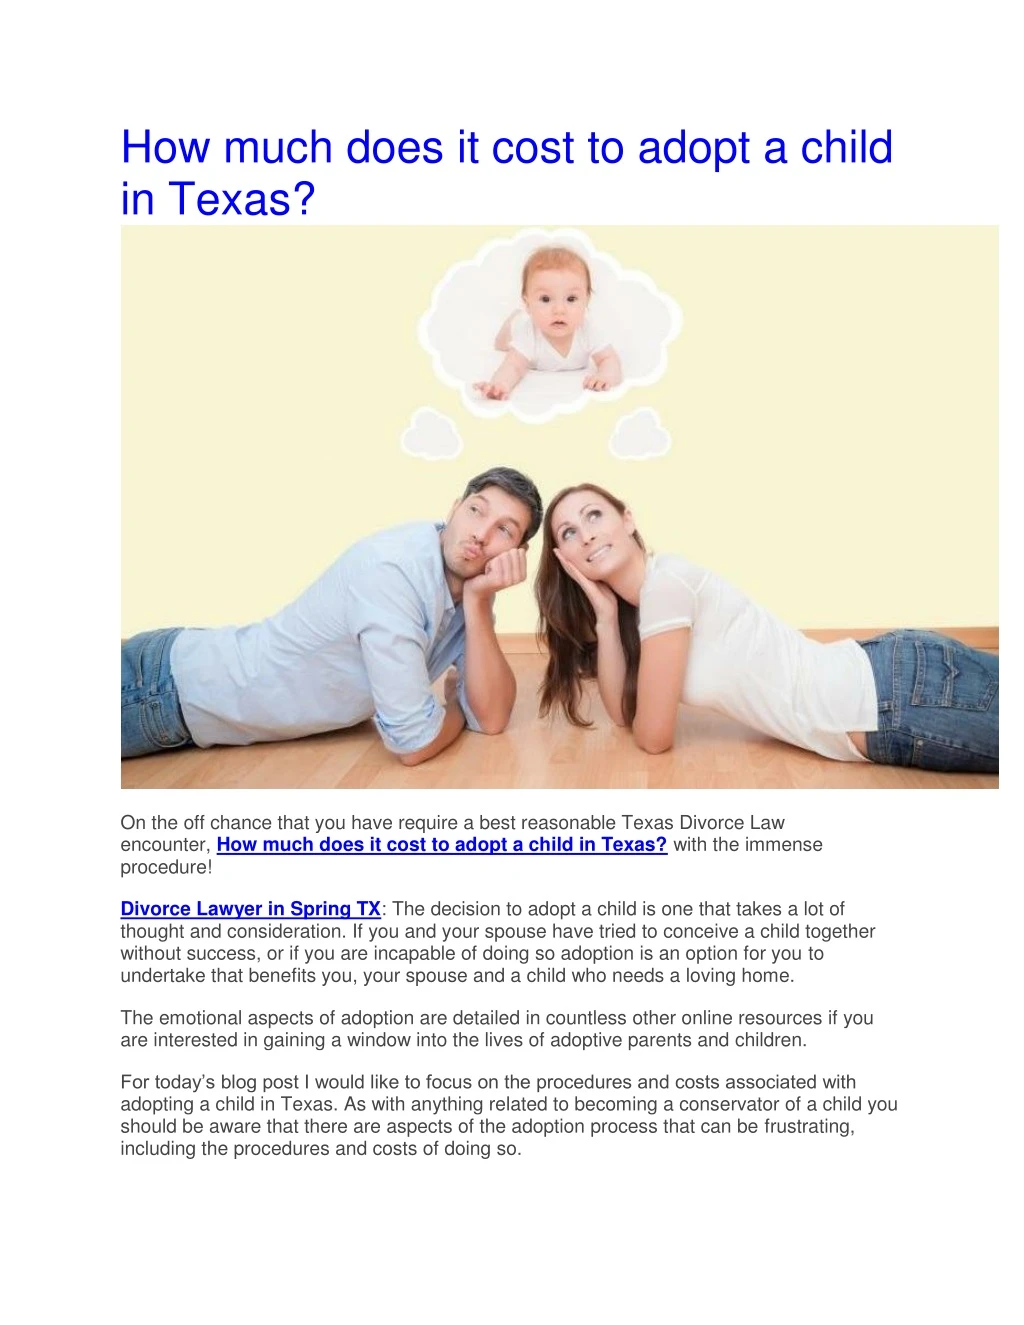 how much does it cost to adopt a child in texas